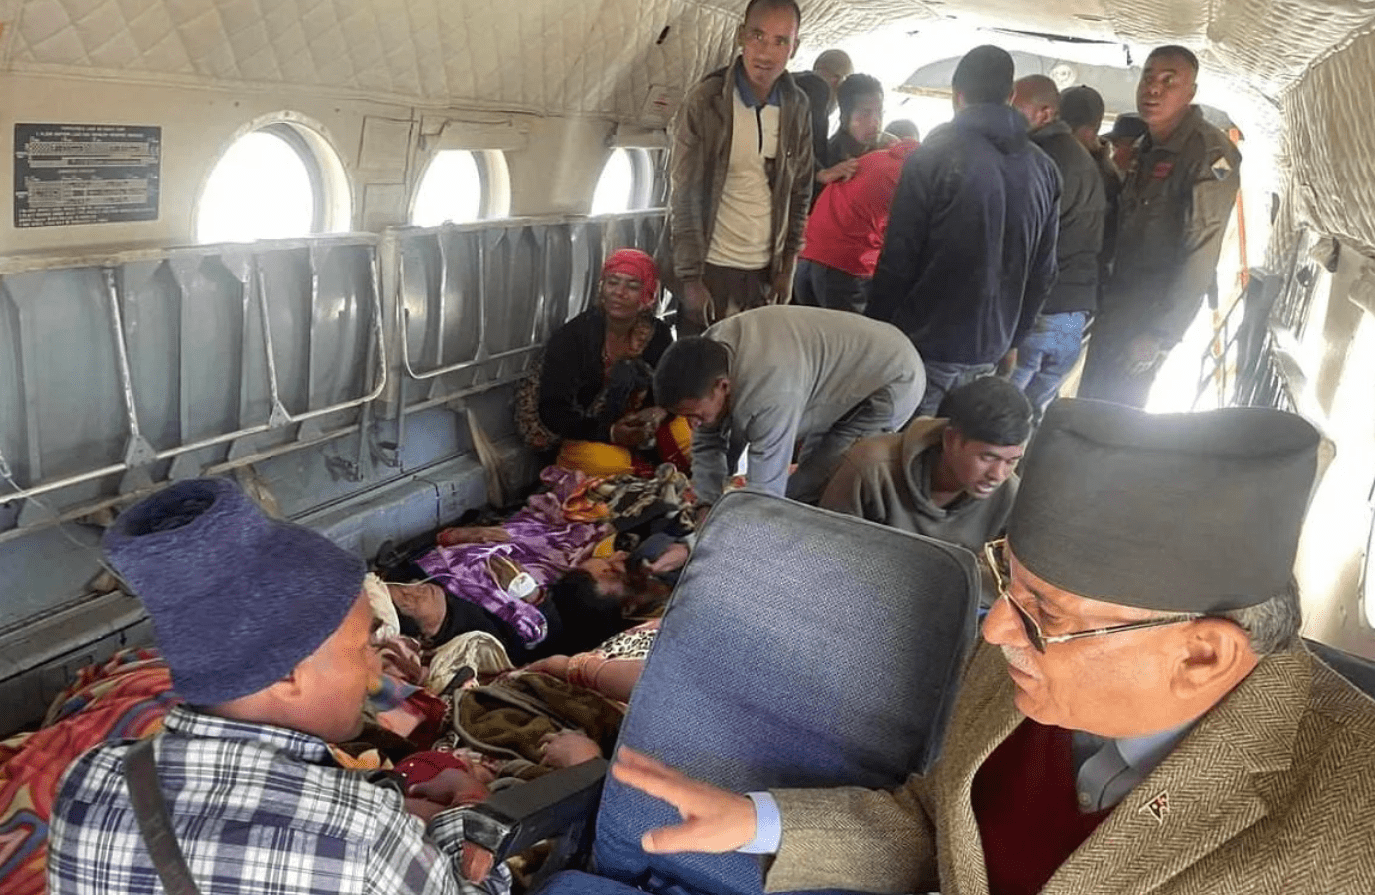 Seven injured people brought to Bheri Hospital from Jajarkot